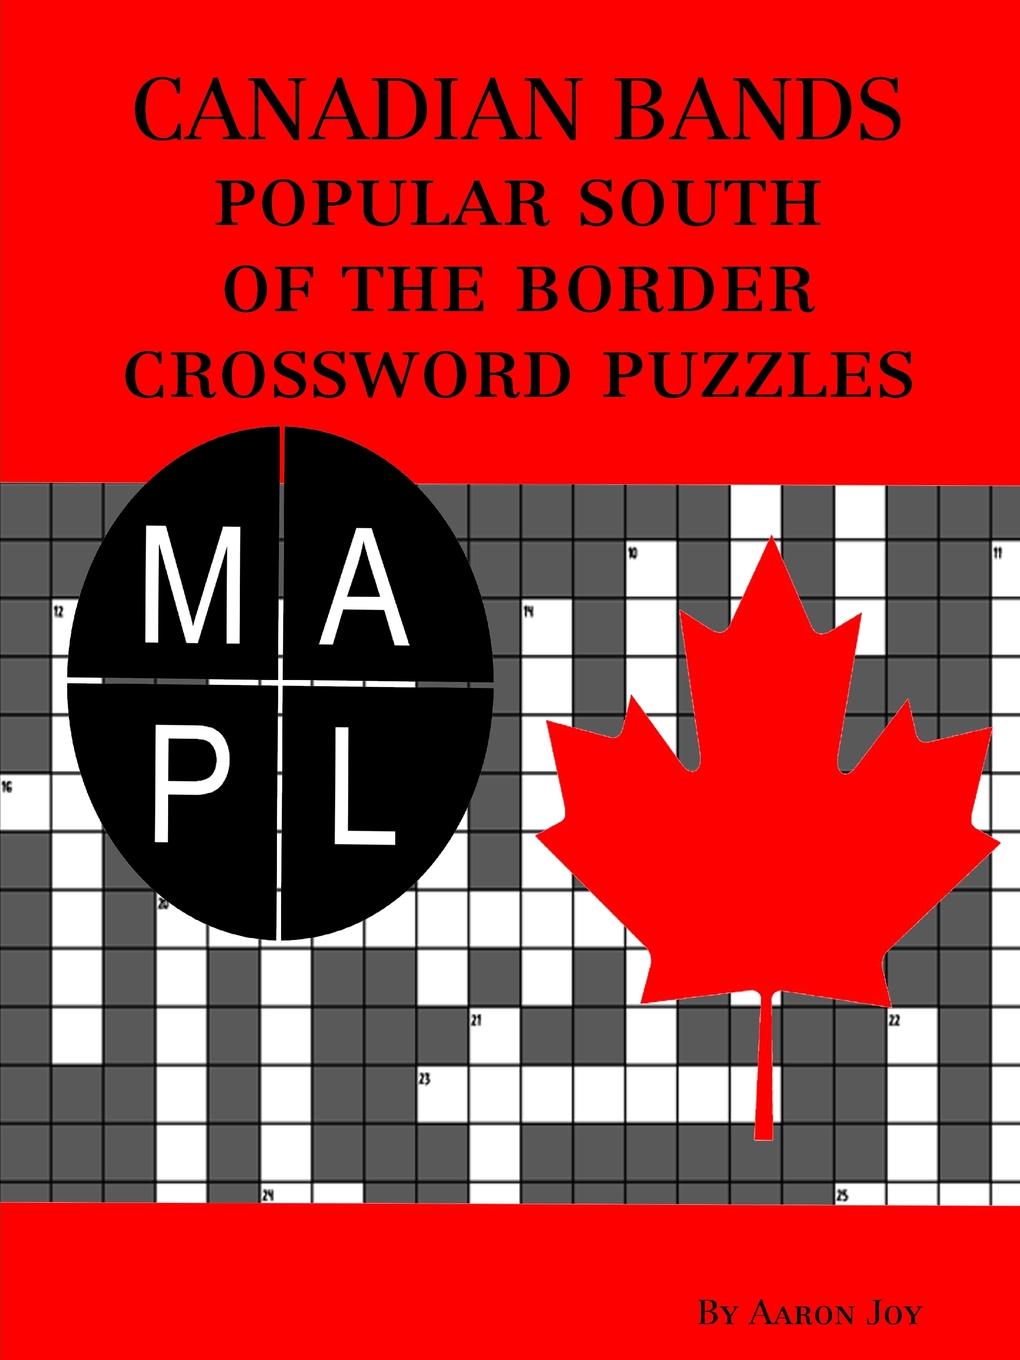 Canadian Bands Popular South Of The Border Crossword Puzzles